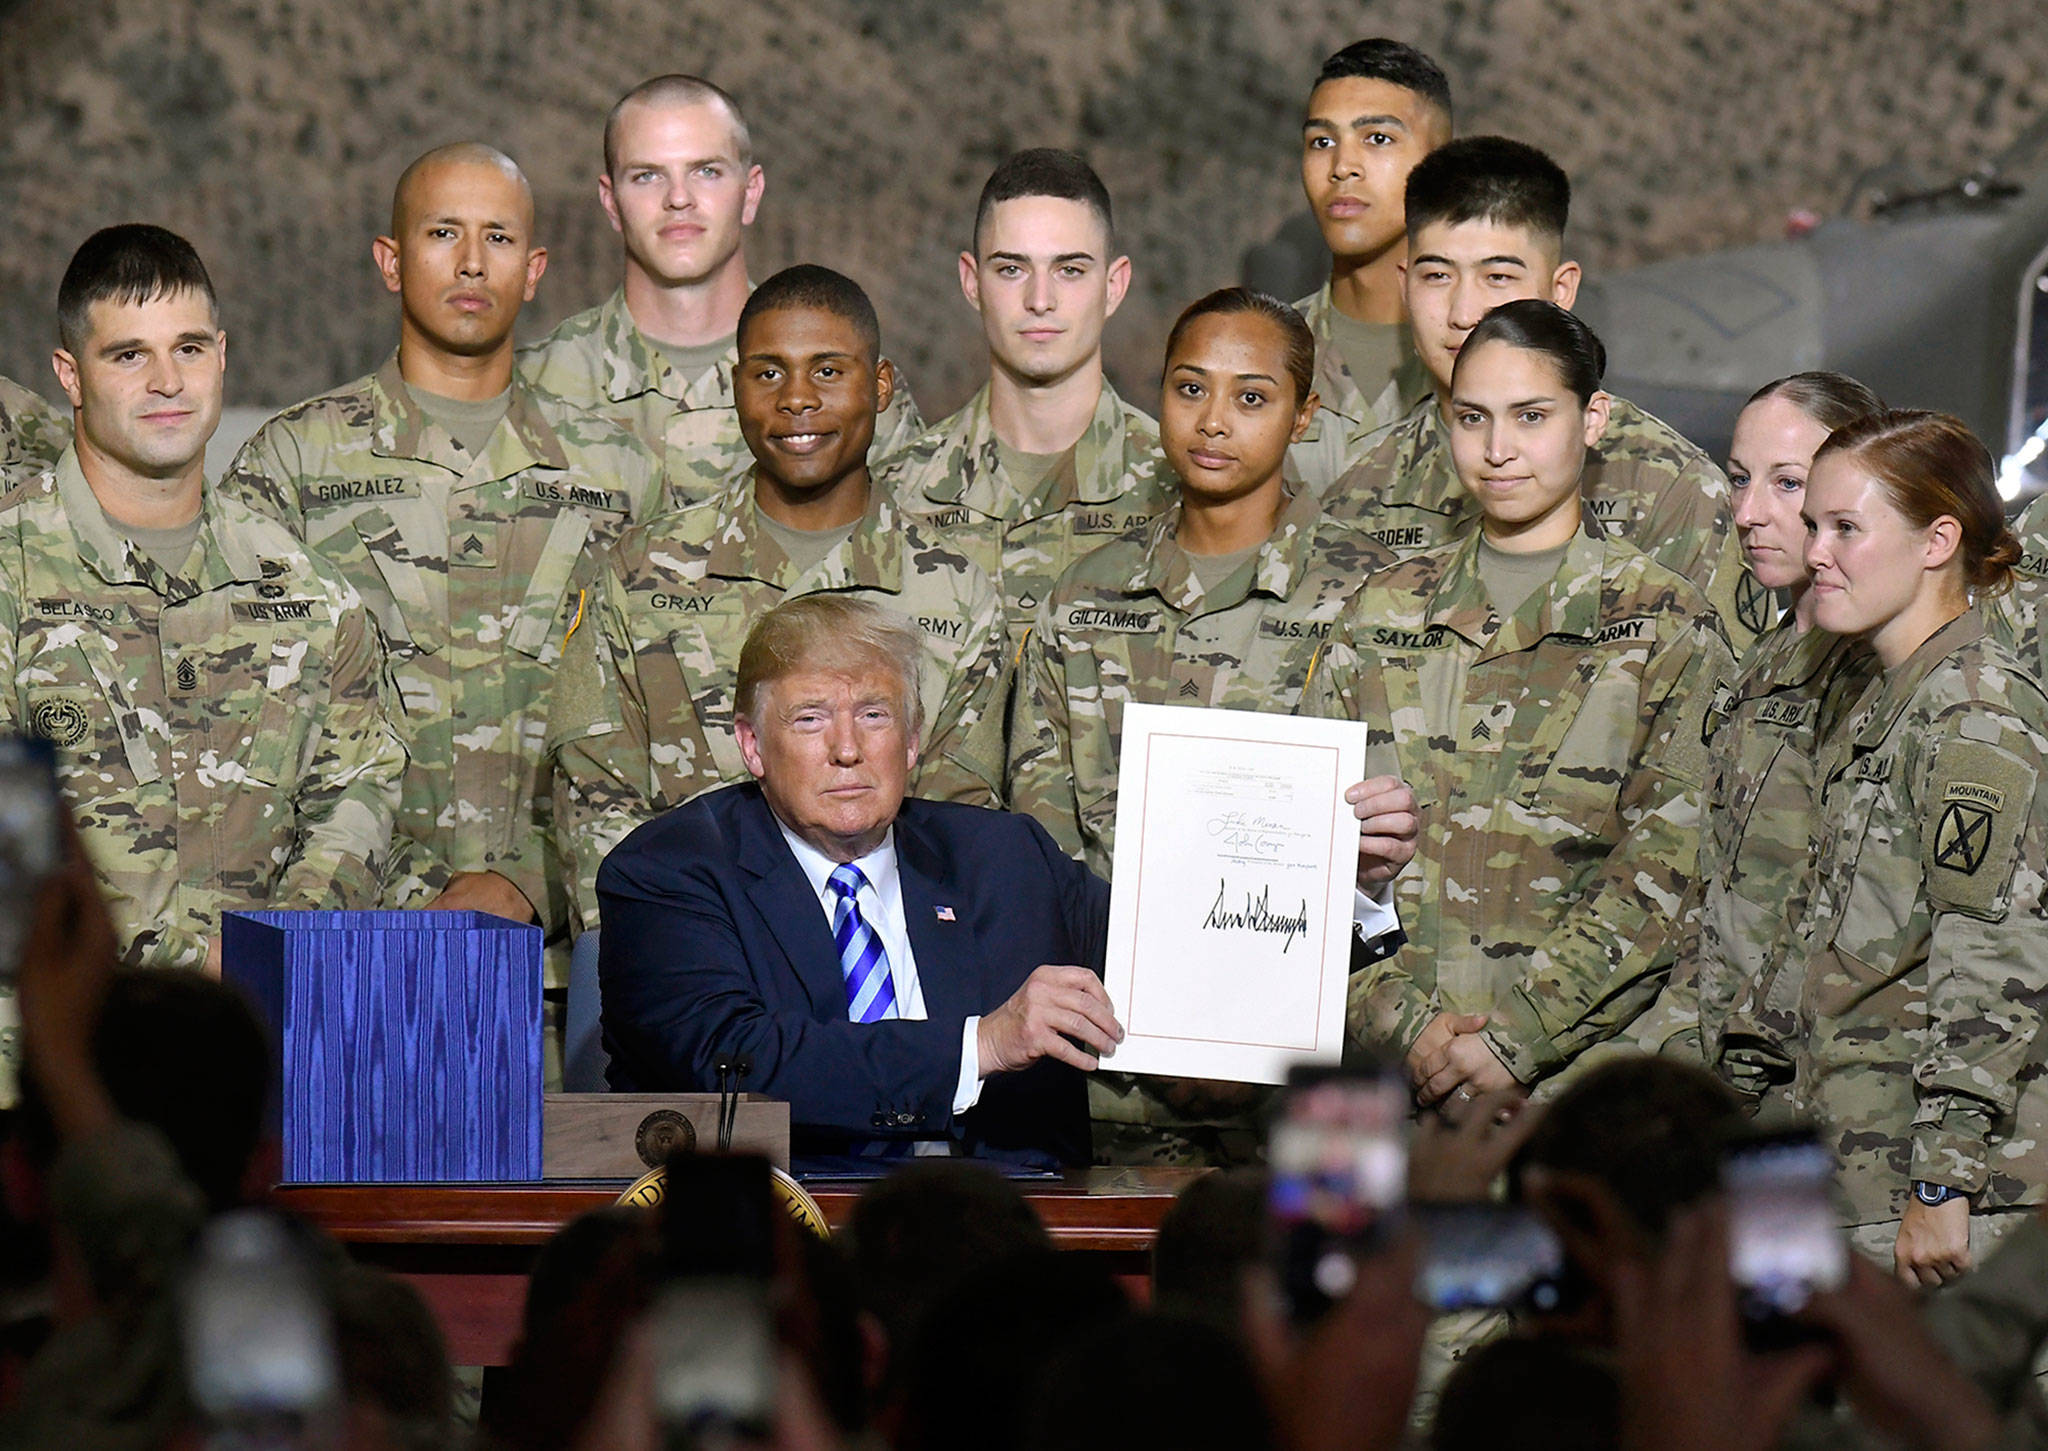 President Donald Trump signed the John McCain National Defense Authorization Act for Fiscal Year 2019 at a ceremony Monday at Fort Drum, New York. (AP Photo/Hans Pennink)